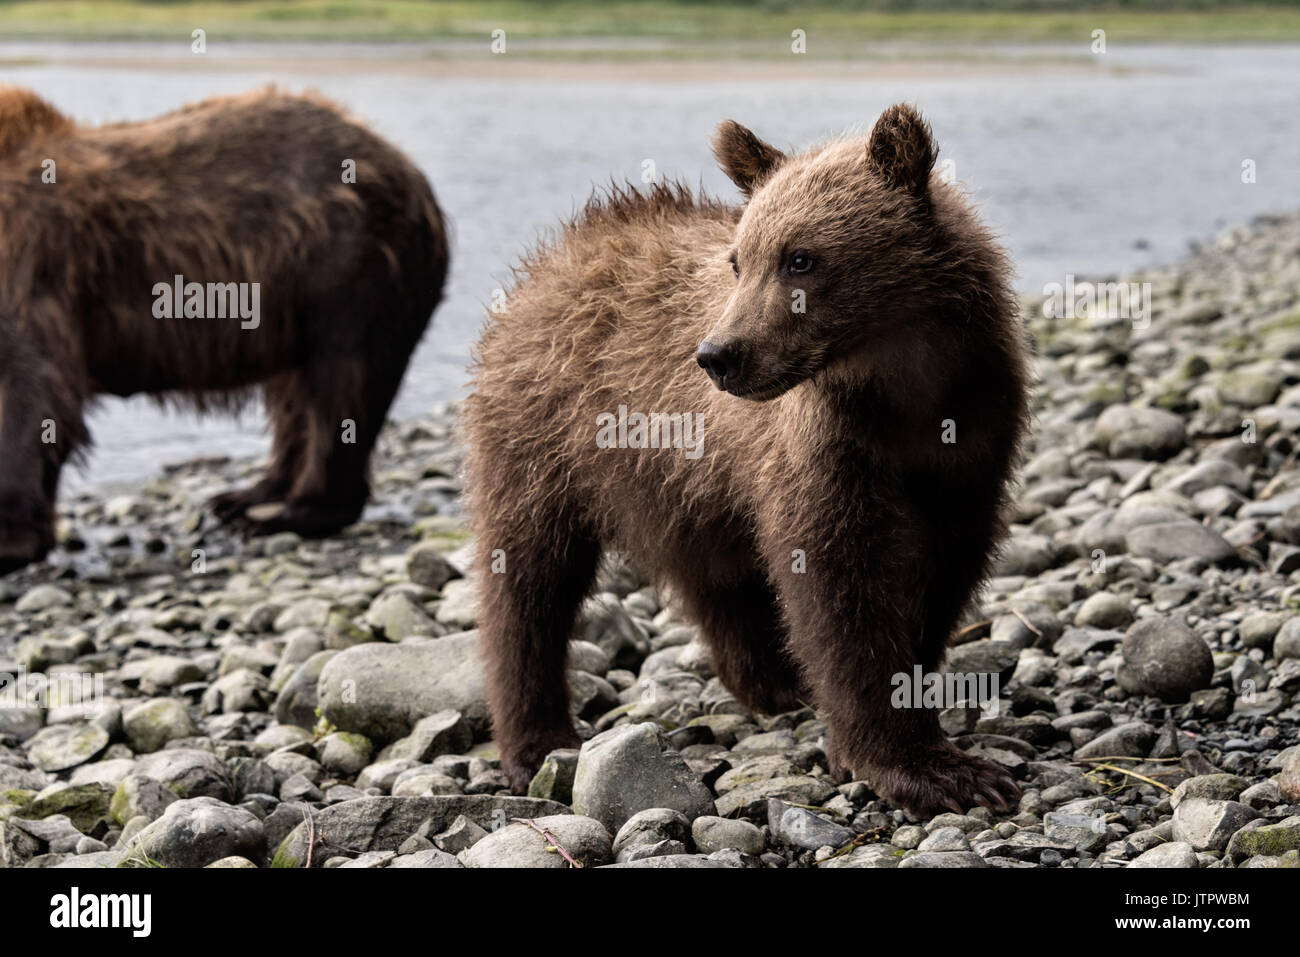 A curious brown bear cub at the McNeil River State Game Sanctuary on the Kenai Peninsula, Alaska. The remote site is accessed only with a special permit and is the world’s largest seasonal population of brown bears in their natural environment. Stock Photo